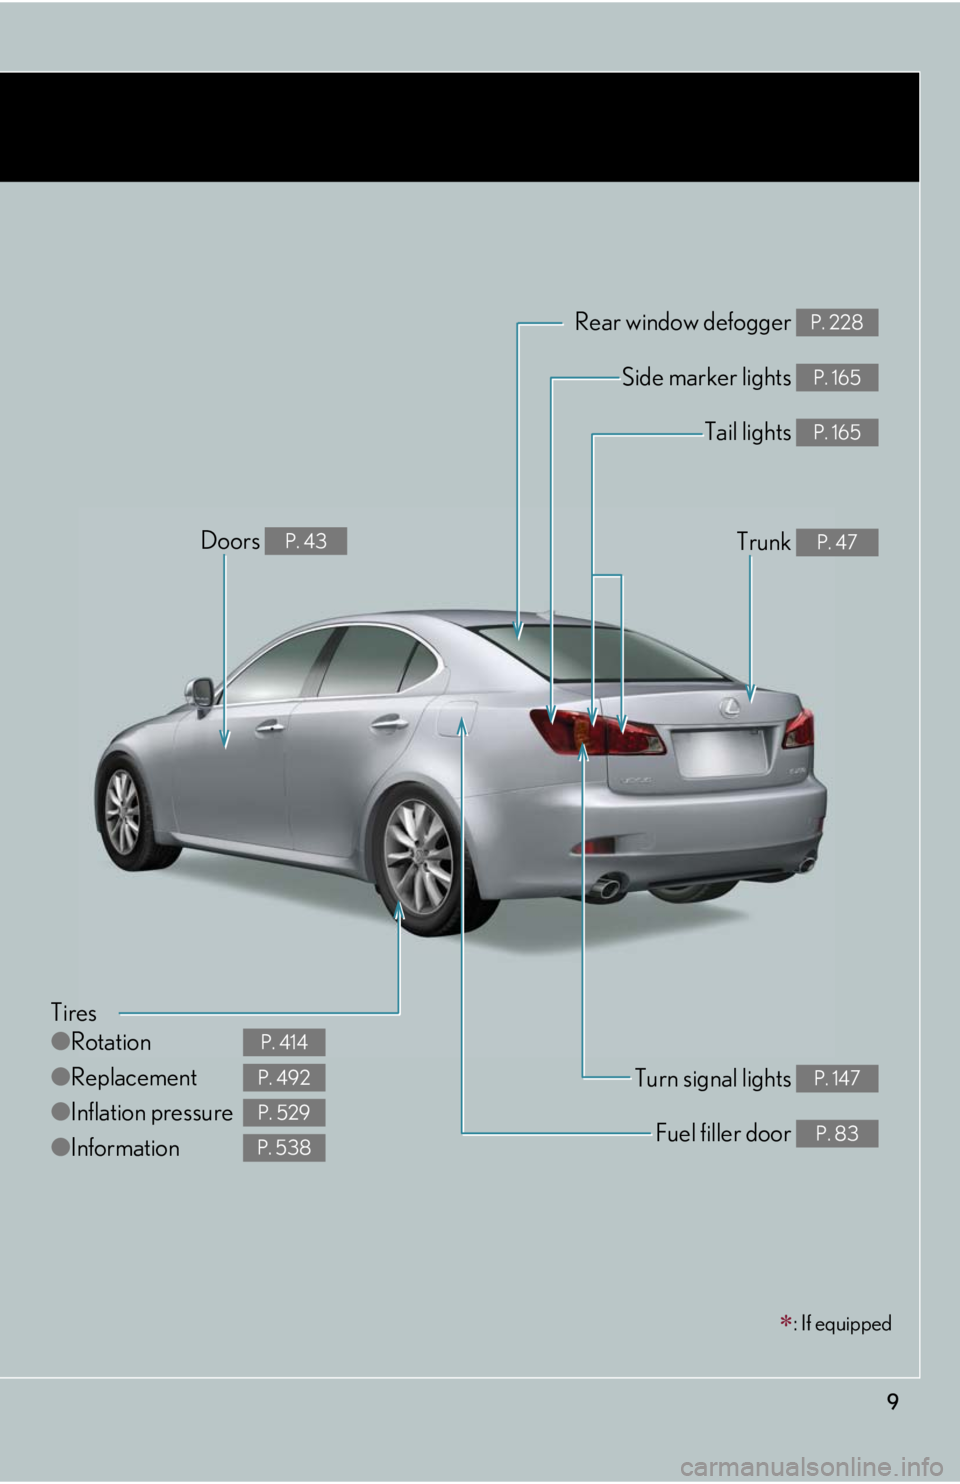 Lexus IS250 2010  Using The Hands-Free Phone System (For Mobile Phones) / LEXUS 2010 IS350 IS250 OWNERS MANUAL (OM53A23U) 9
: If equipped
Tires
●Rotation
●Replacement
●Inflation pressure
●Information
P. 414
P. 492
P. 529
P. 538
Tail lights P. 165
Side marker lights P. 165
Trunk P. 47
Rear window defogger P. 22